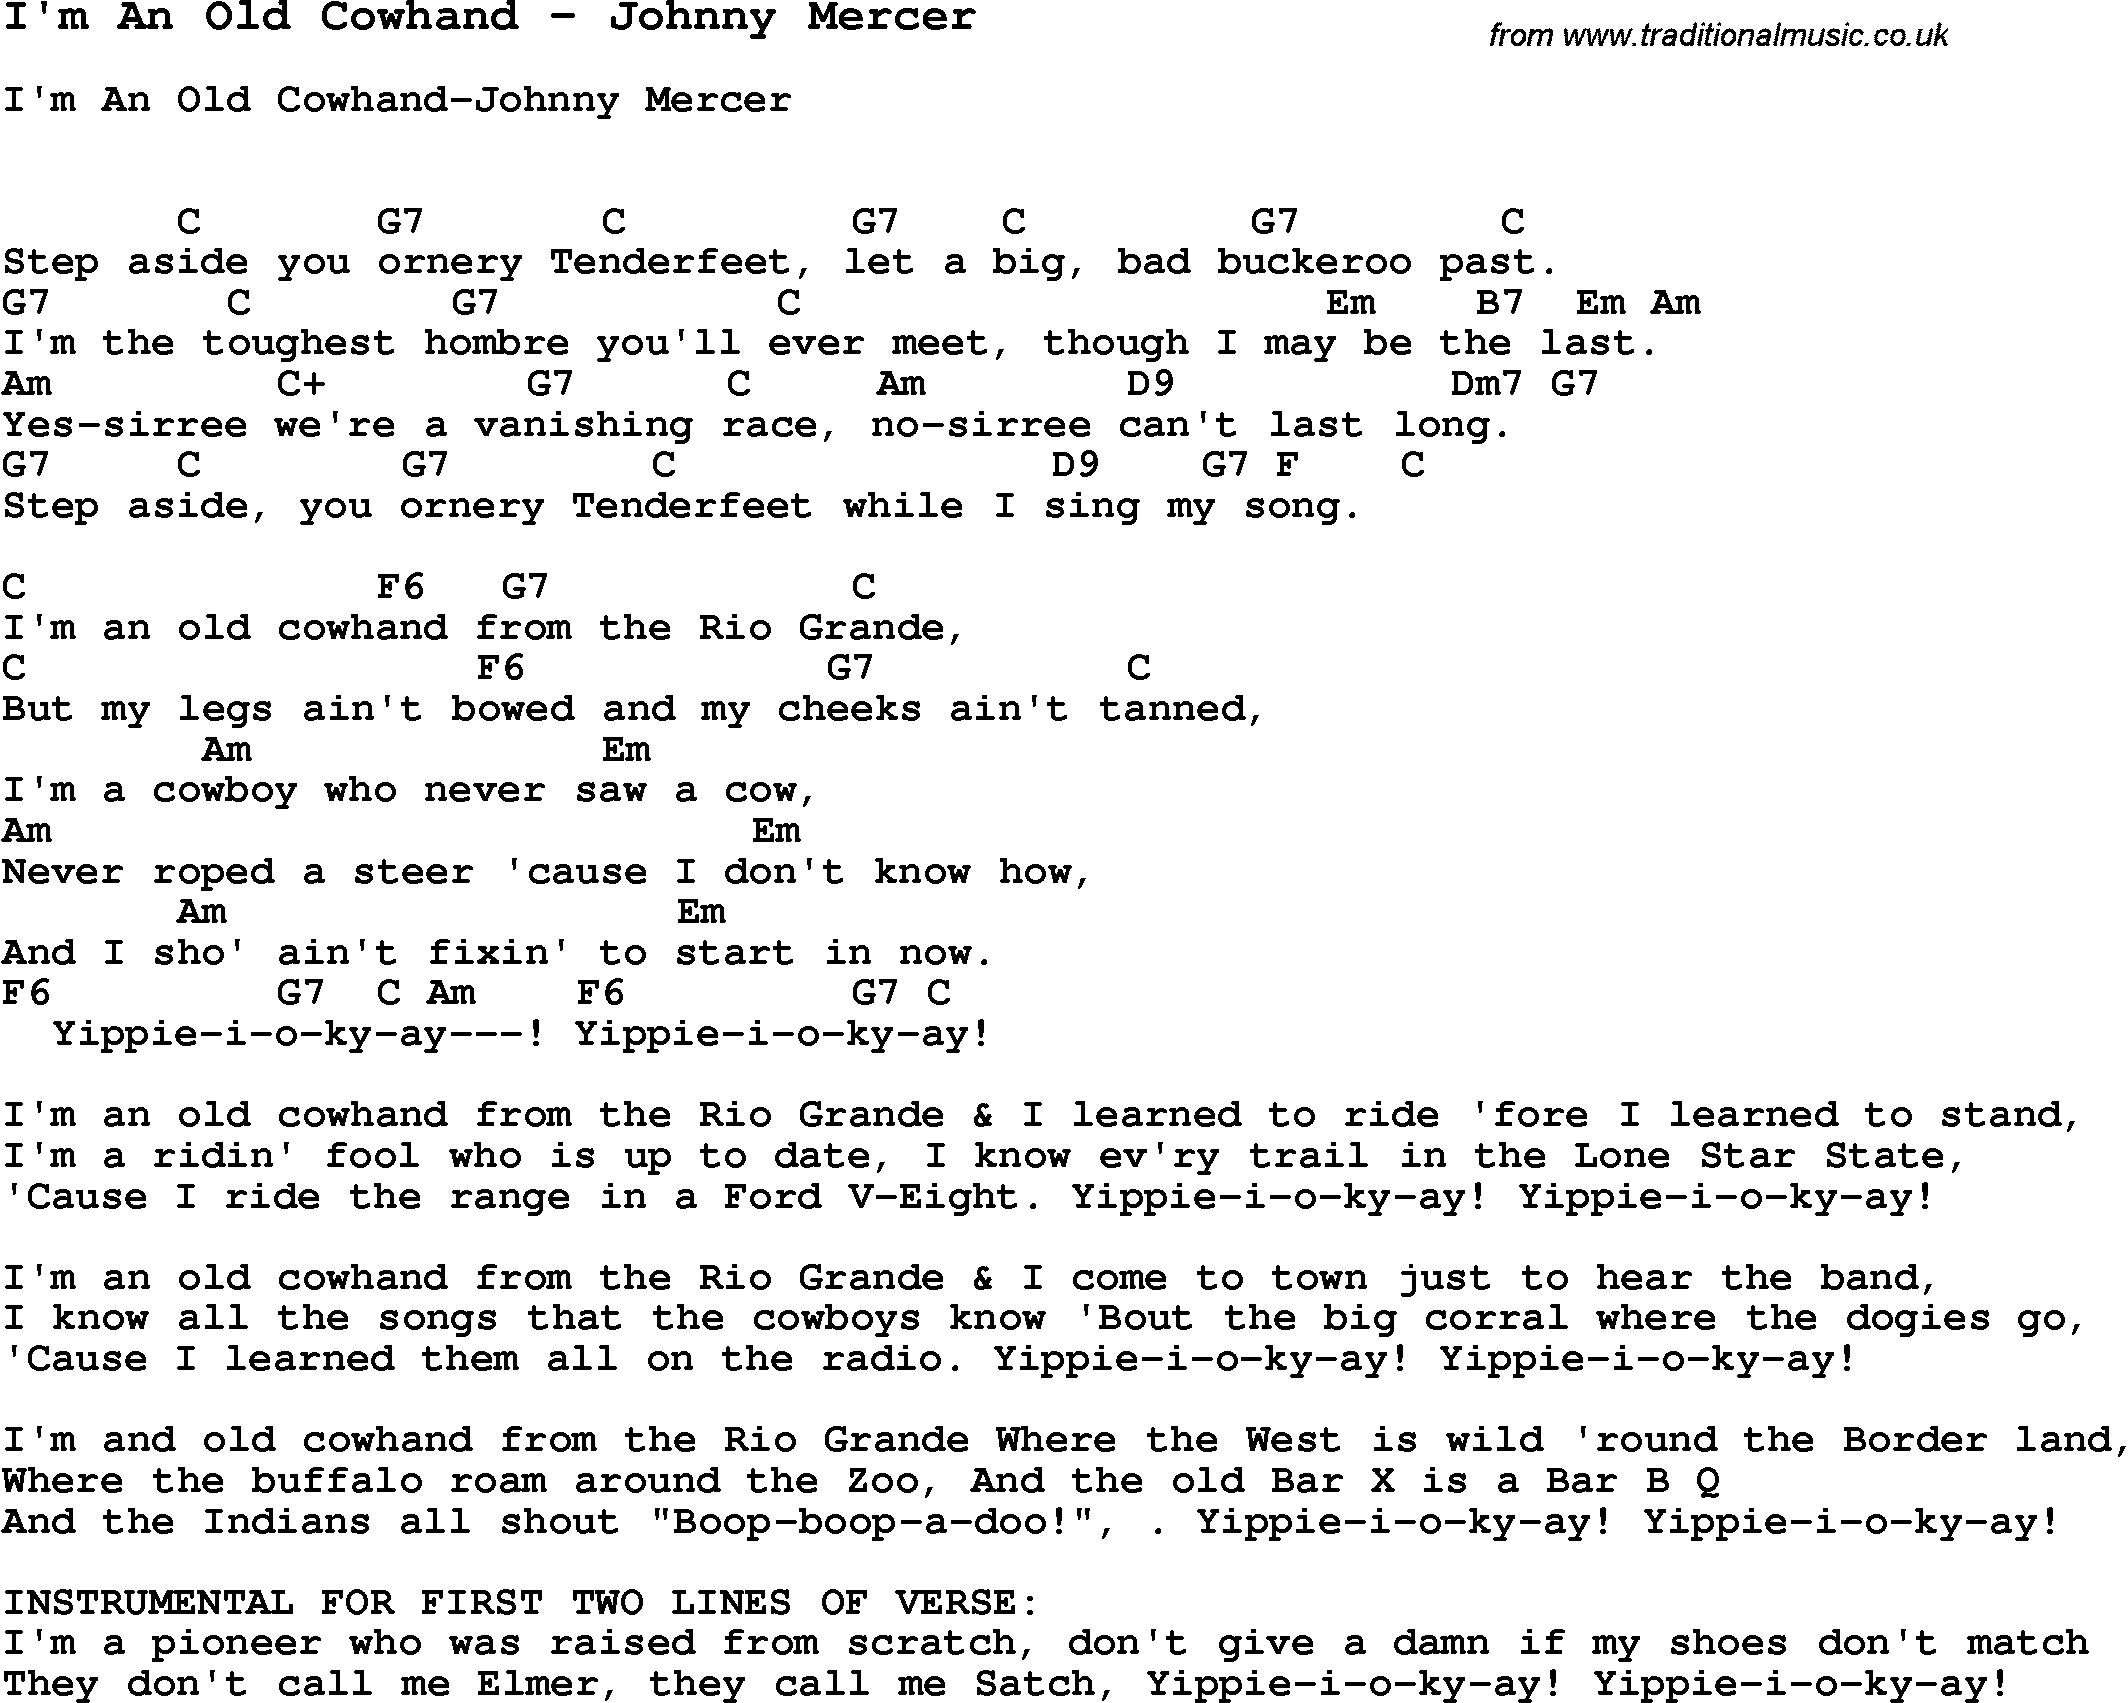 Song I'm An Old Cowhand by Johnny Mercer, with lyrics for vocal performance and accompaniment chords for Ukulele, Guitar Banjo etc.